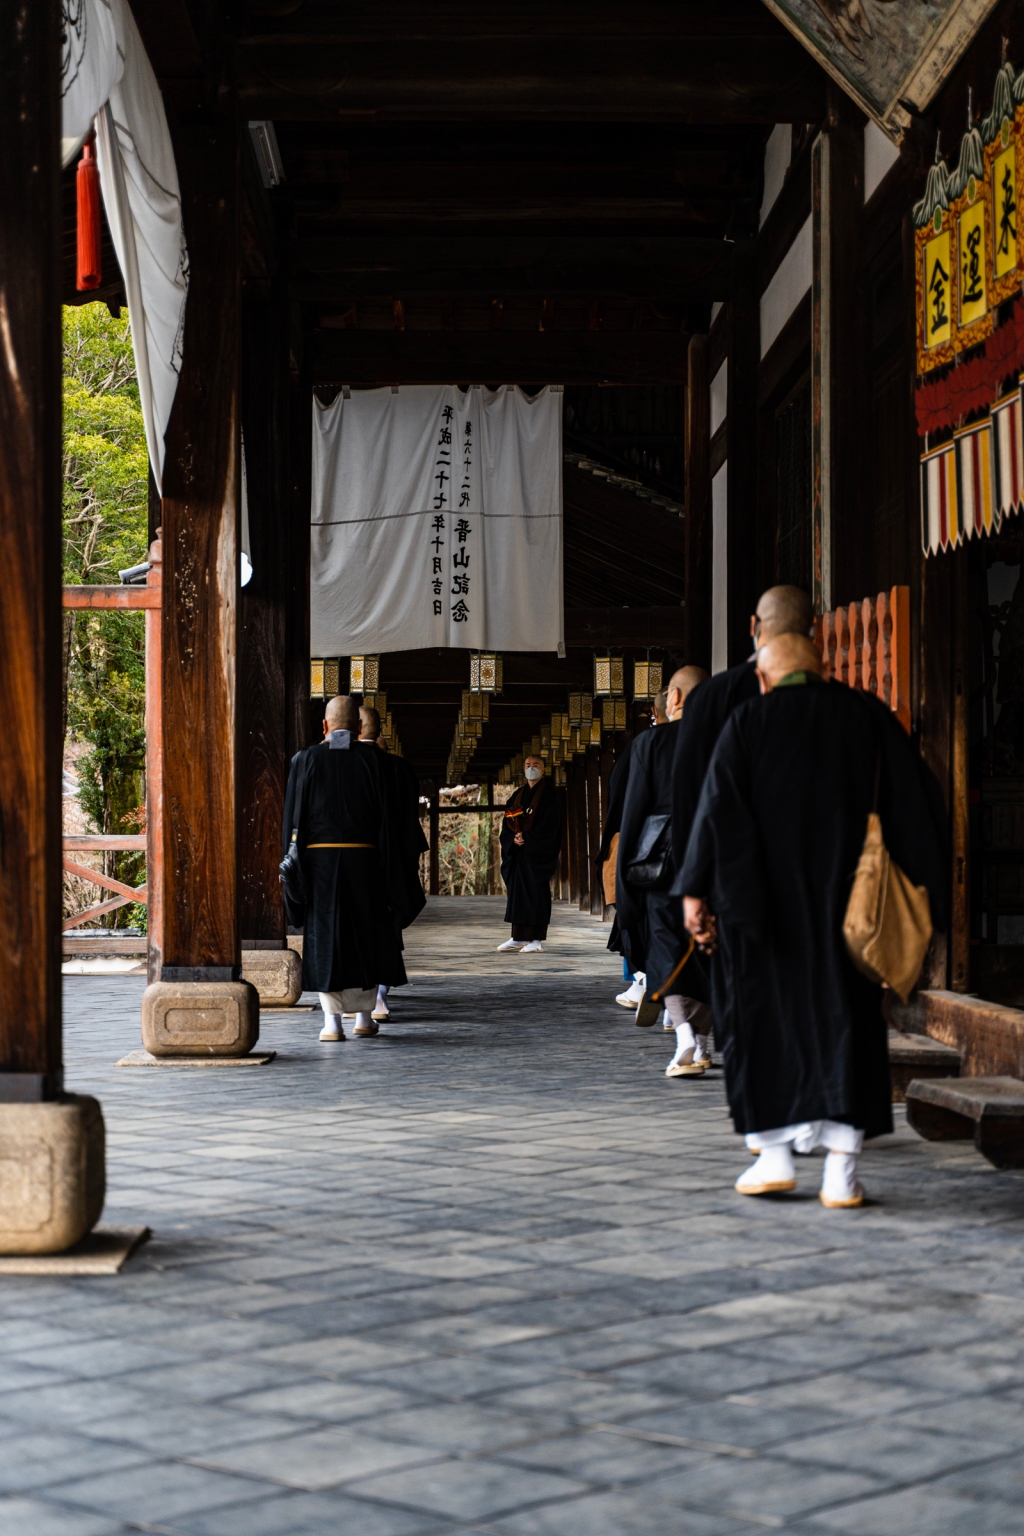 Kyoto sightseeing tour: exclusive temple tours, meditation lessons, and incense making